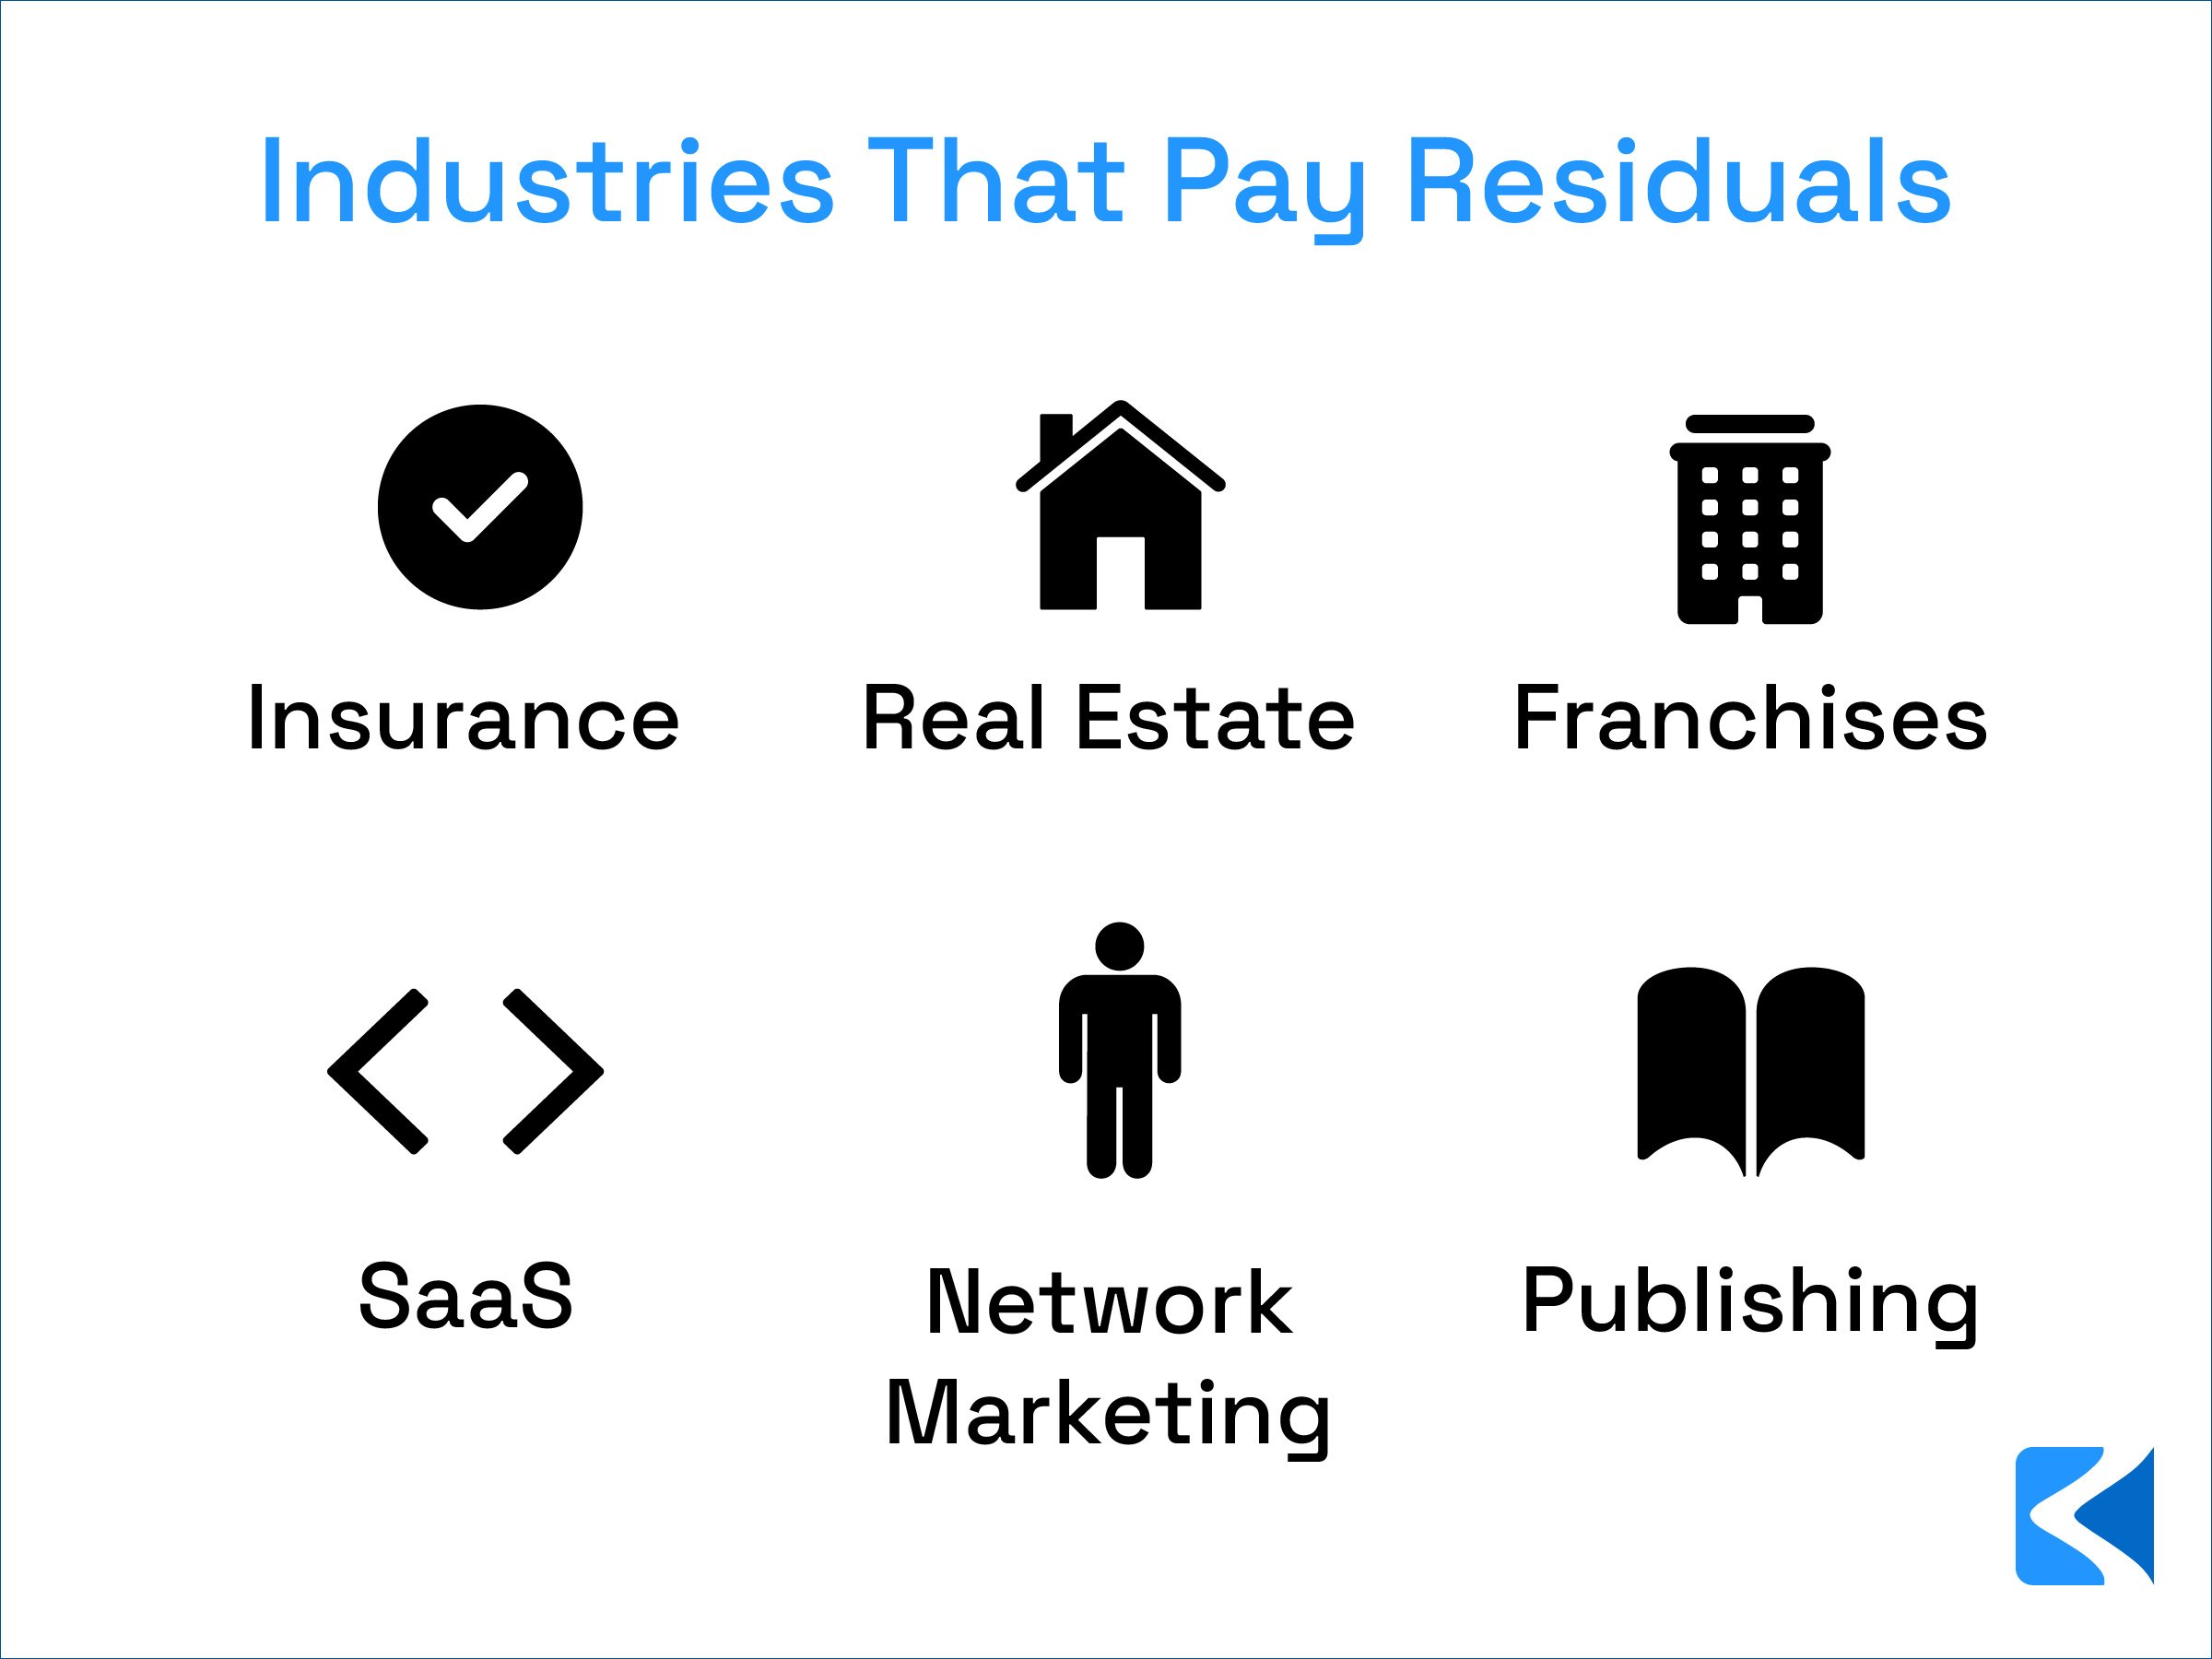 Industries that use residual commissions